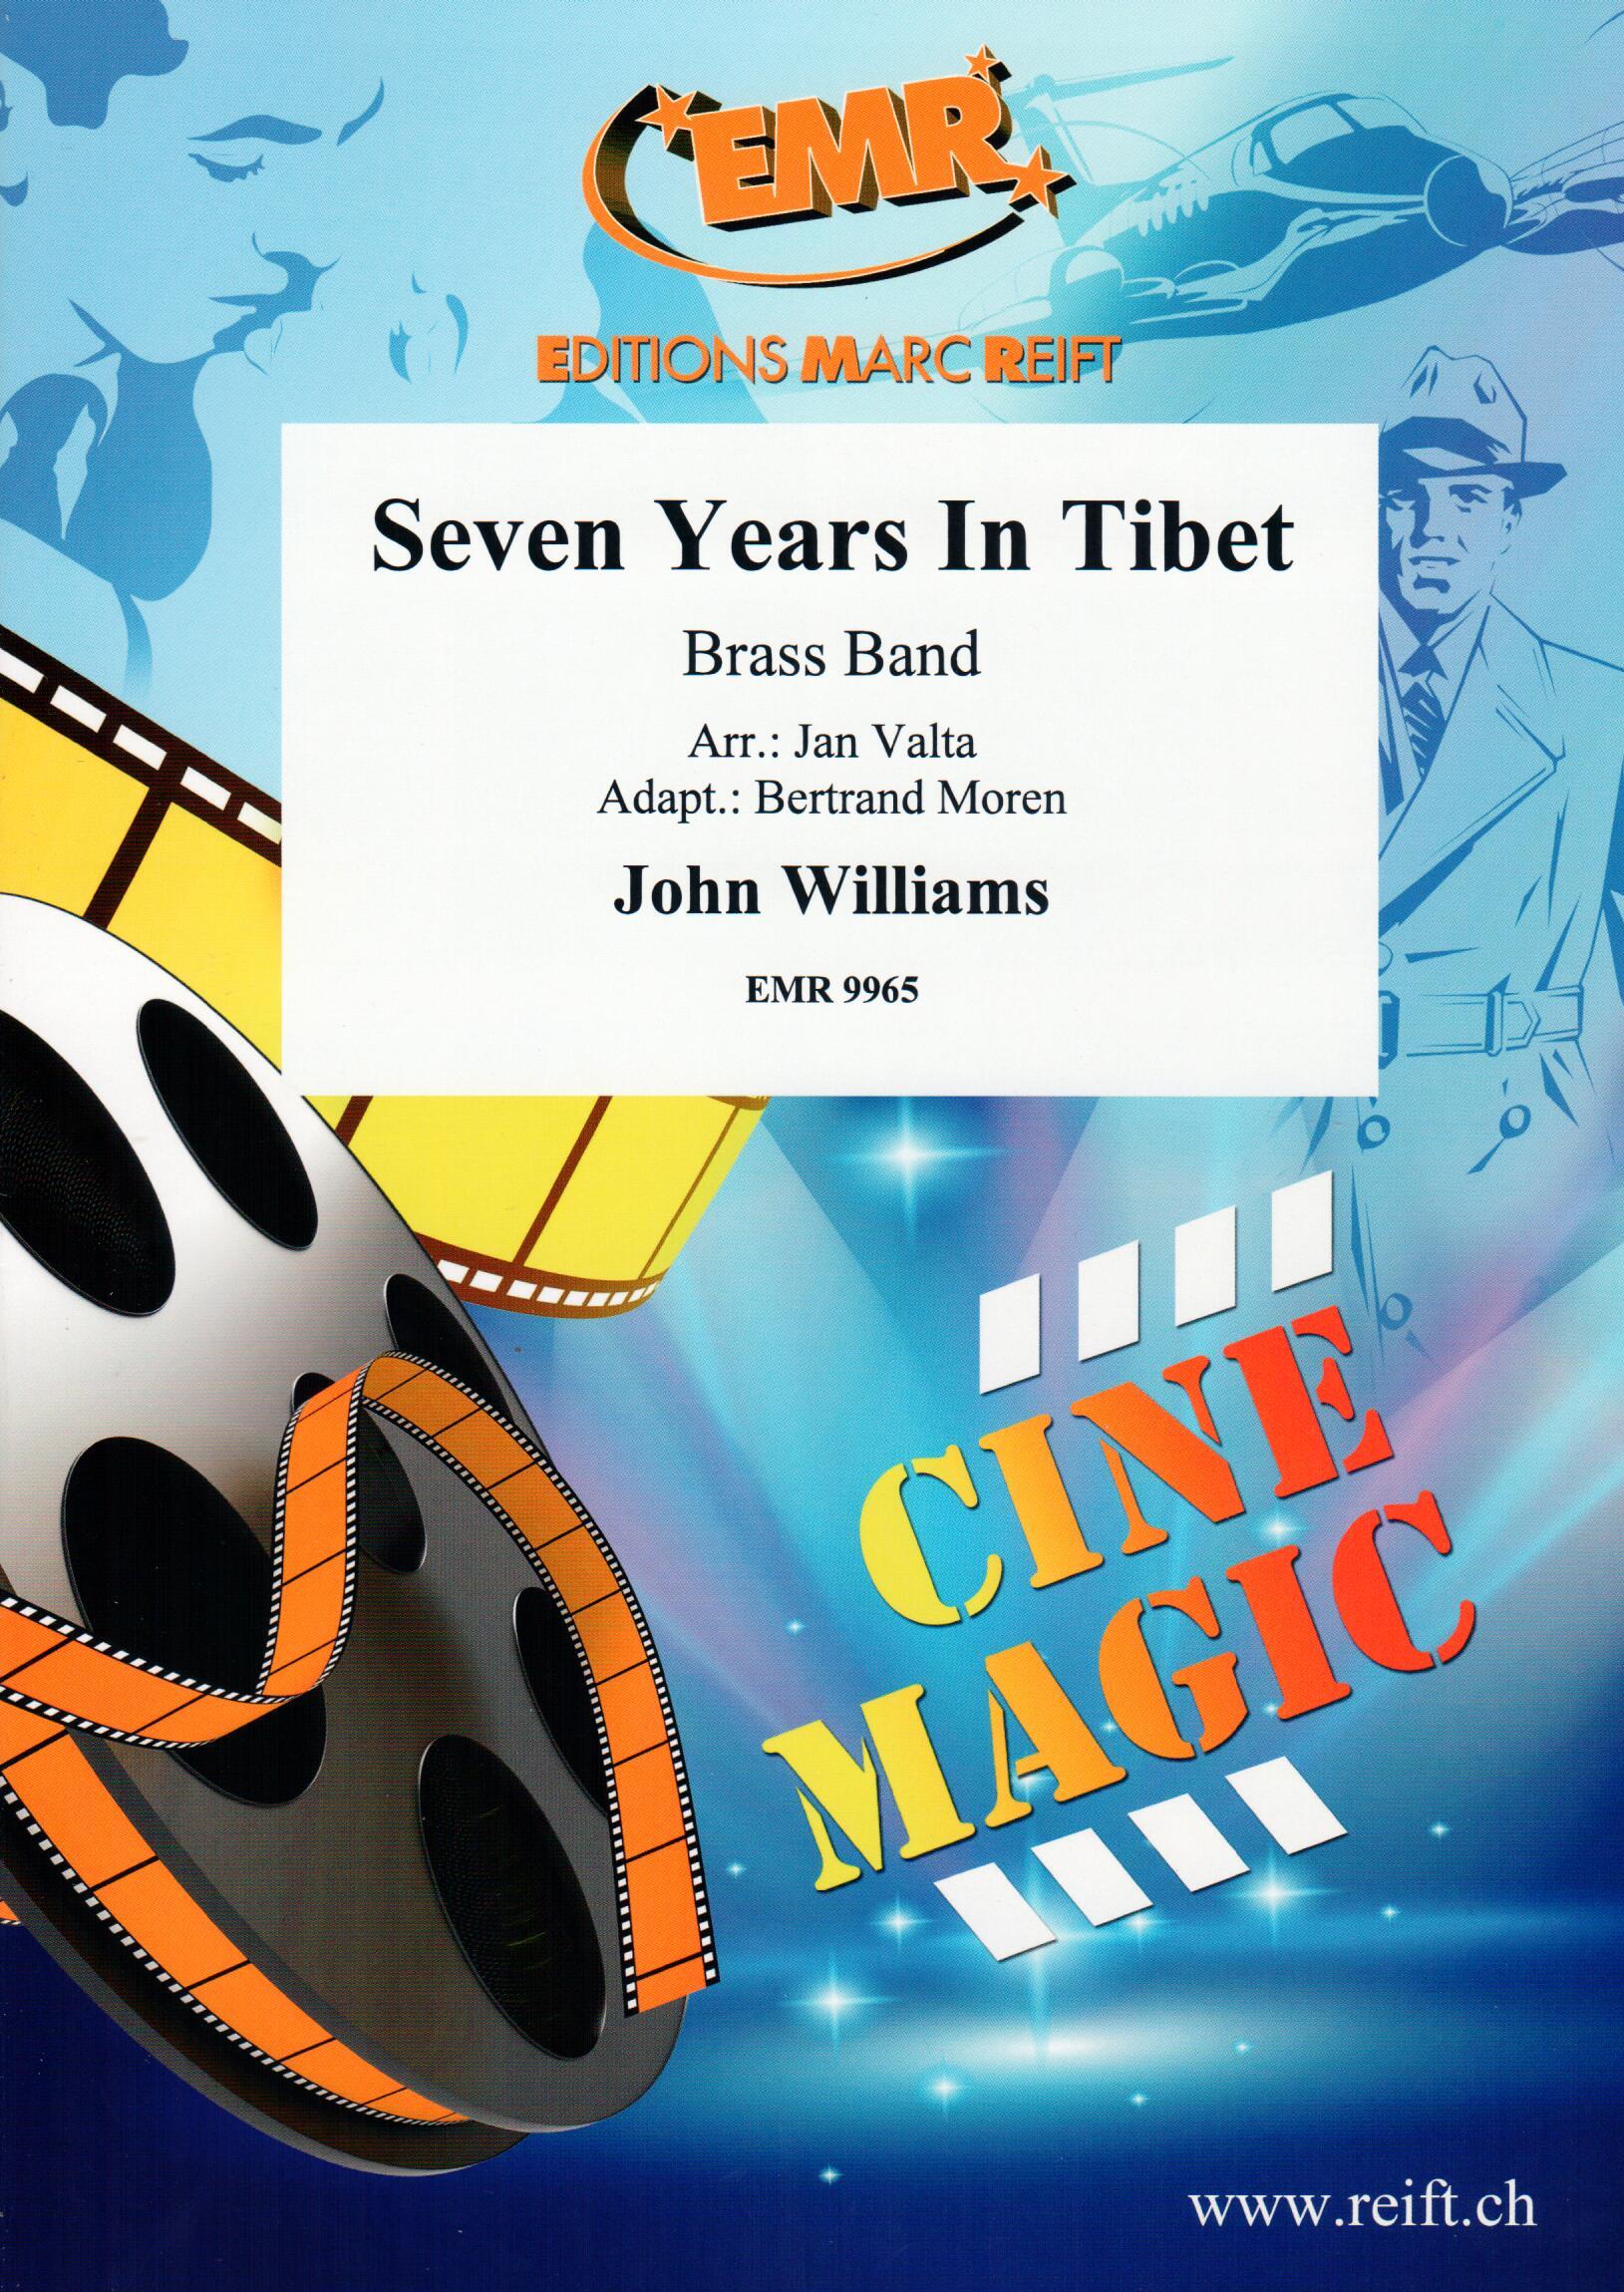 SEVEN YEARS IN TIBET, EMR BRASS BAND